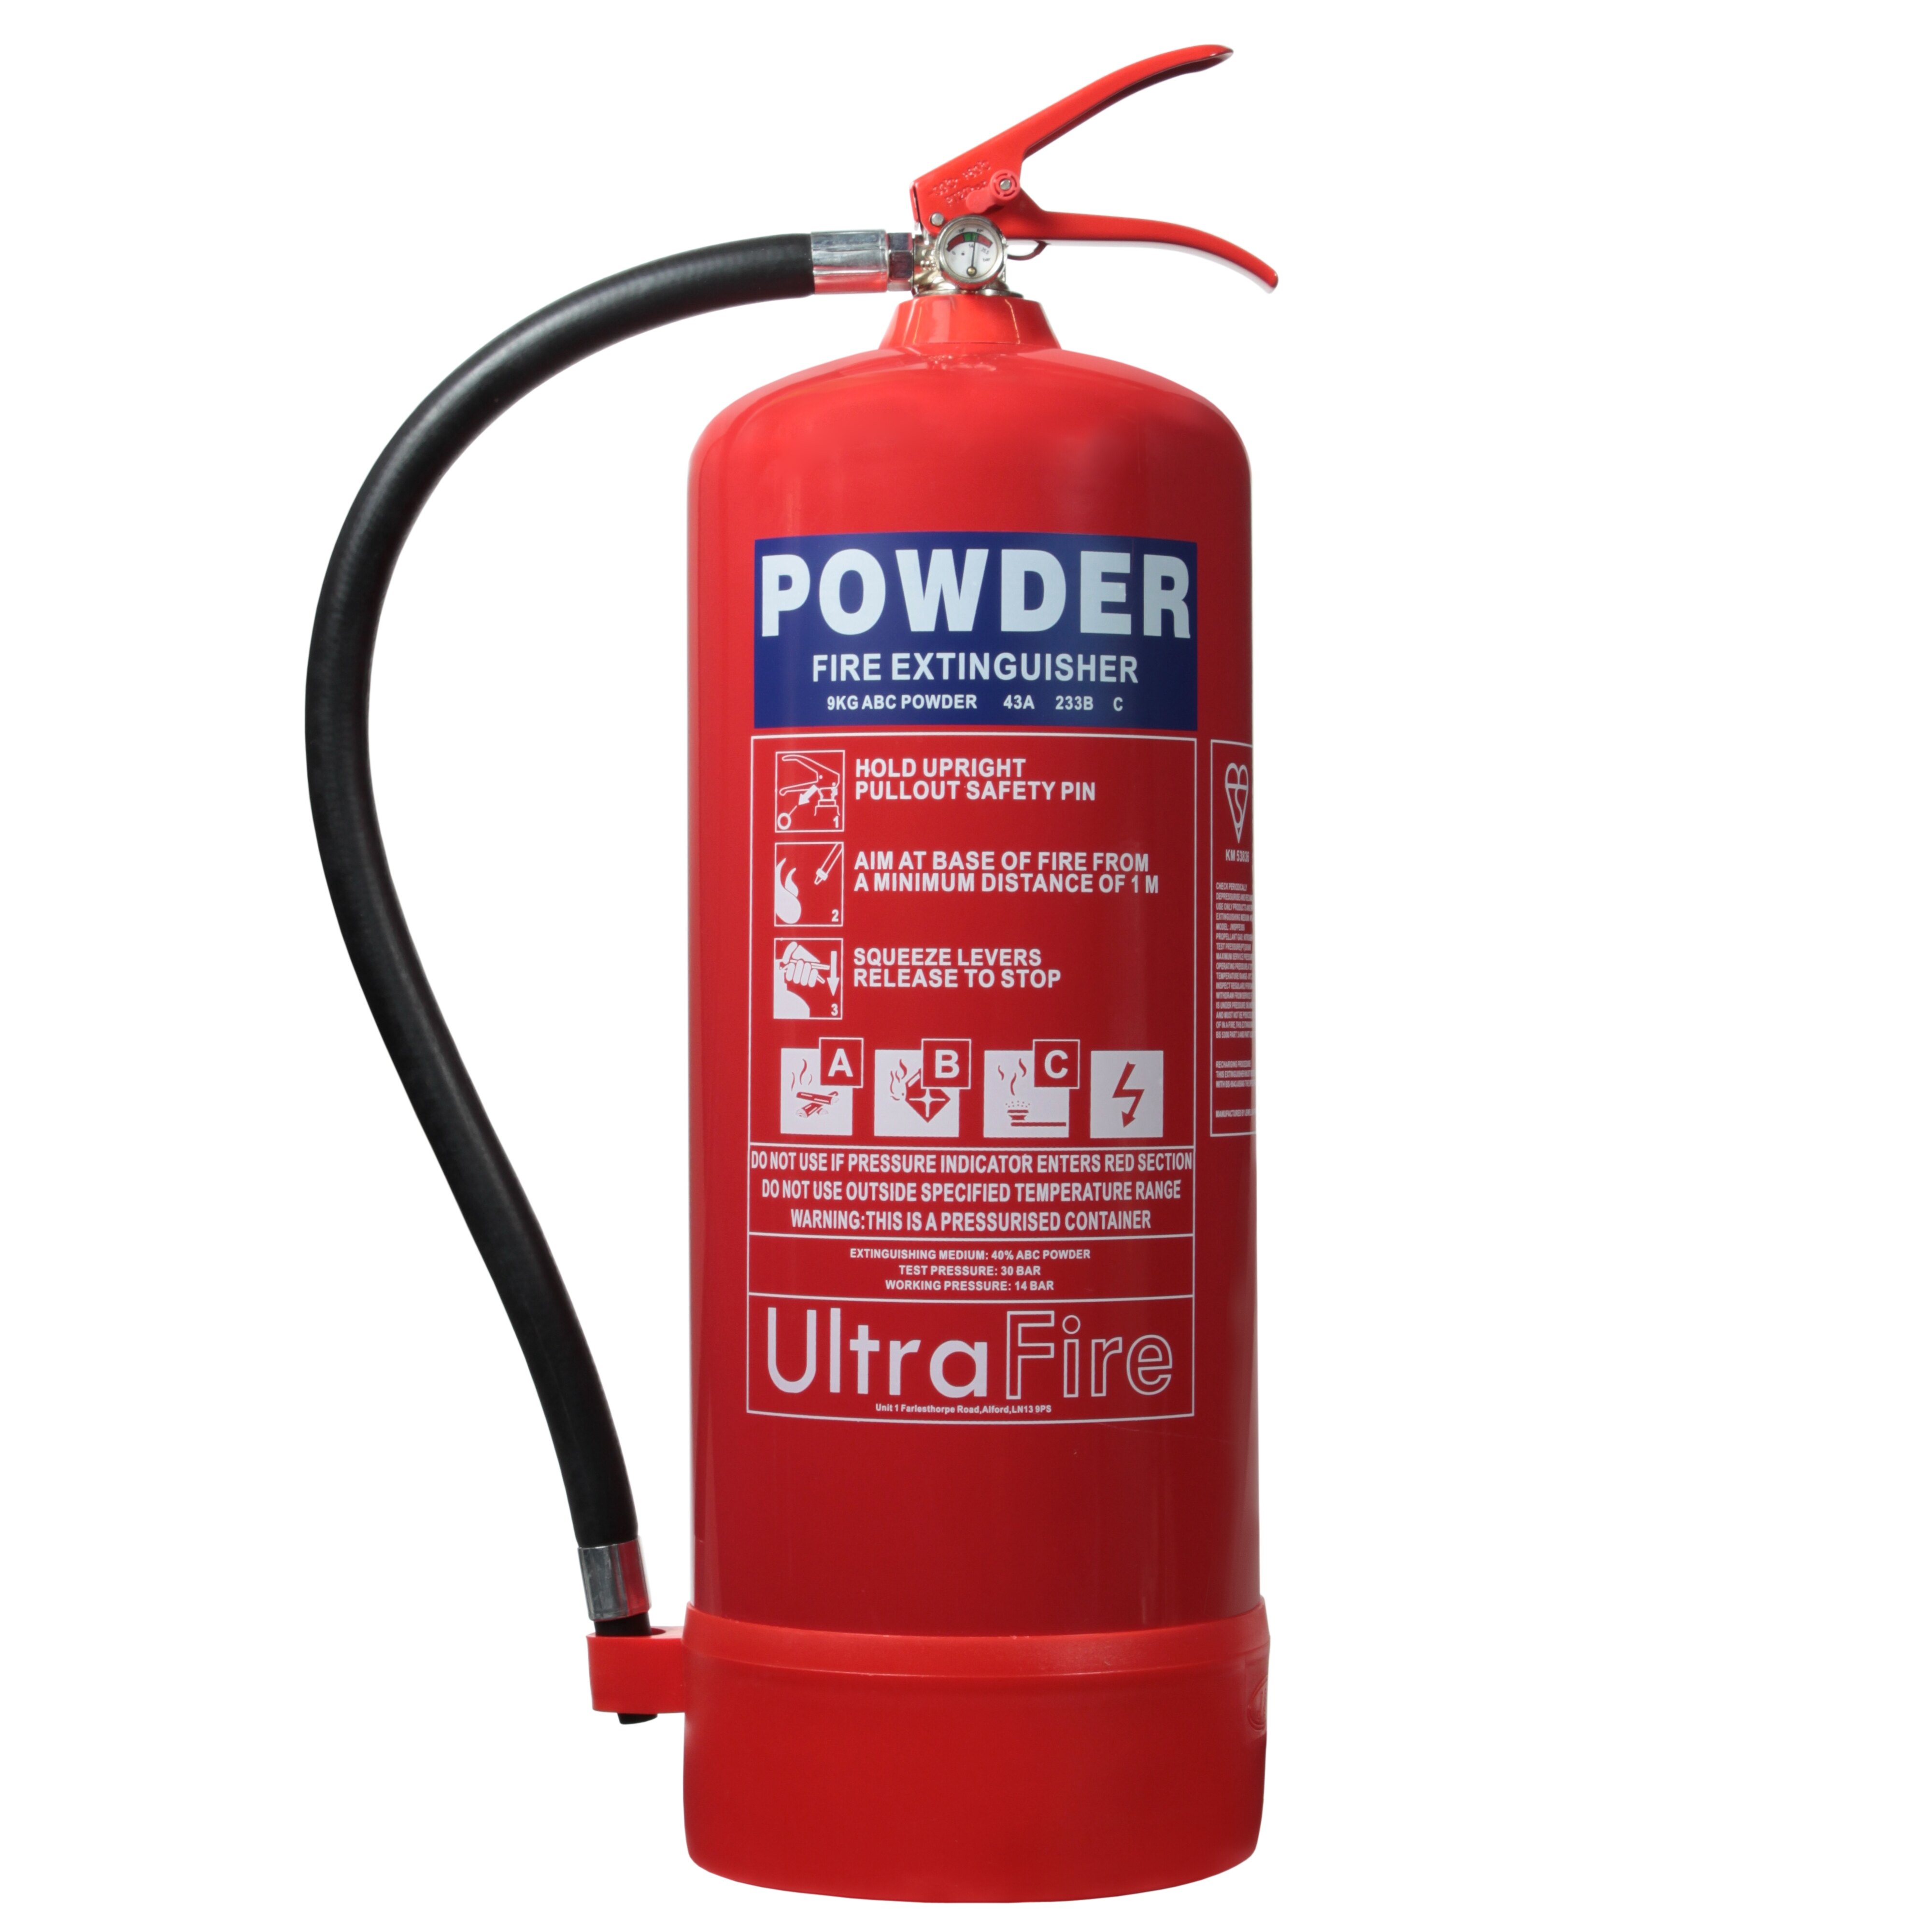 What is ABC powder fire extinguisher used for?